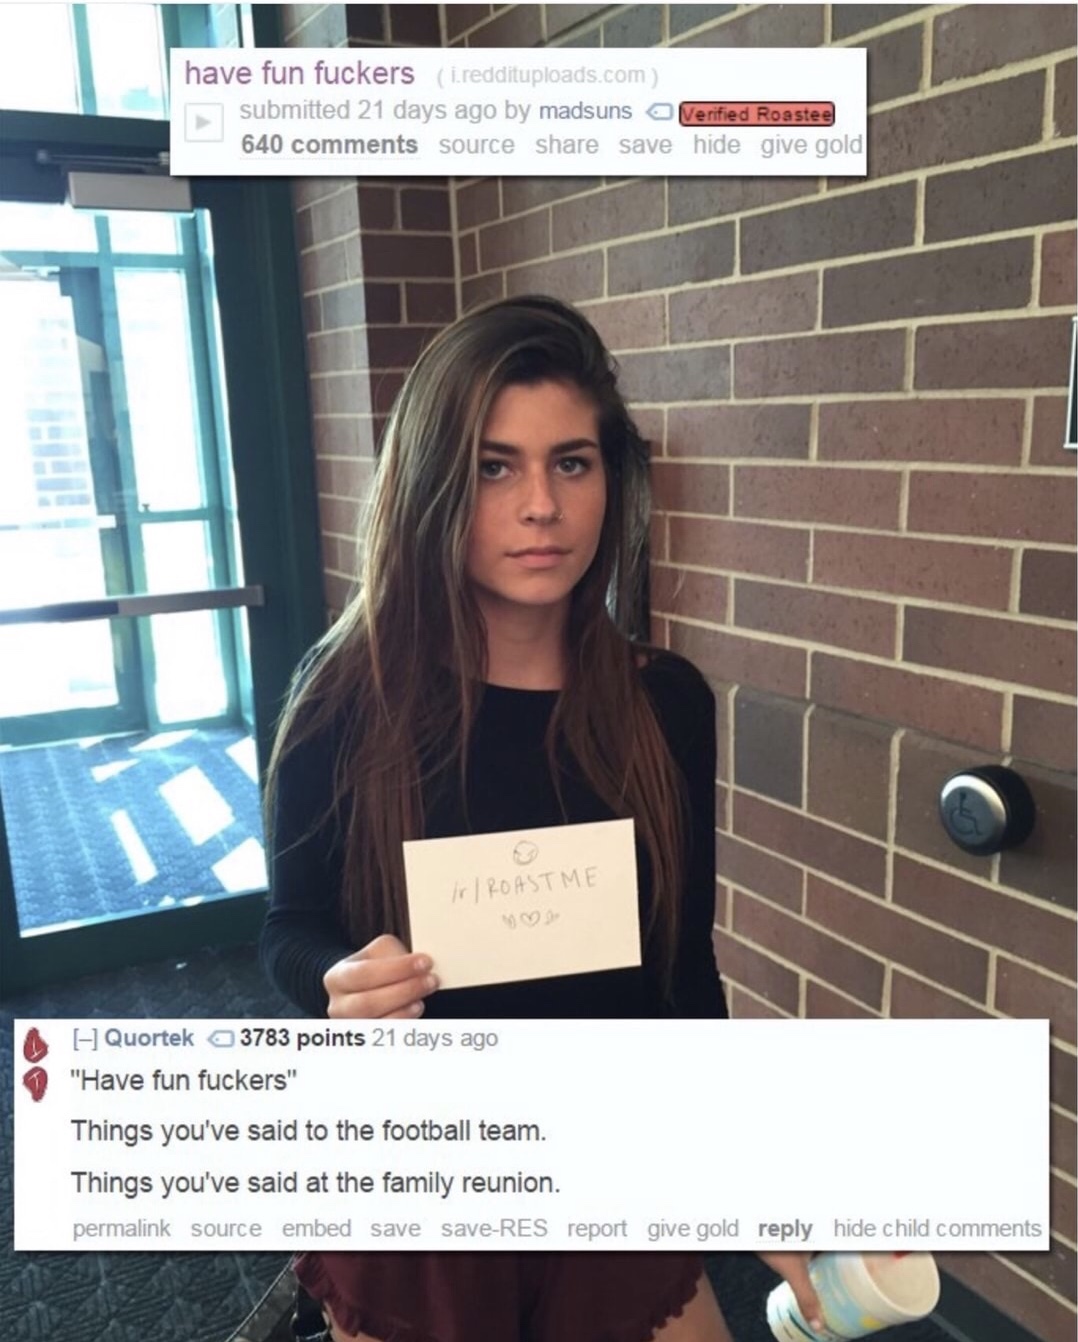 roast me have fun fuckers - have fun fuckers i.reddituploads.com submitted 21 days ago by madsuns Verified Roastee 640 source save hide give gold IrRoastme A H Quortek 3783 points 21 days ago "Have fun fuckers" Things you've said to the football team. Thi